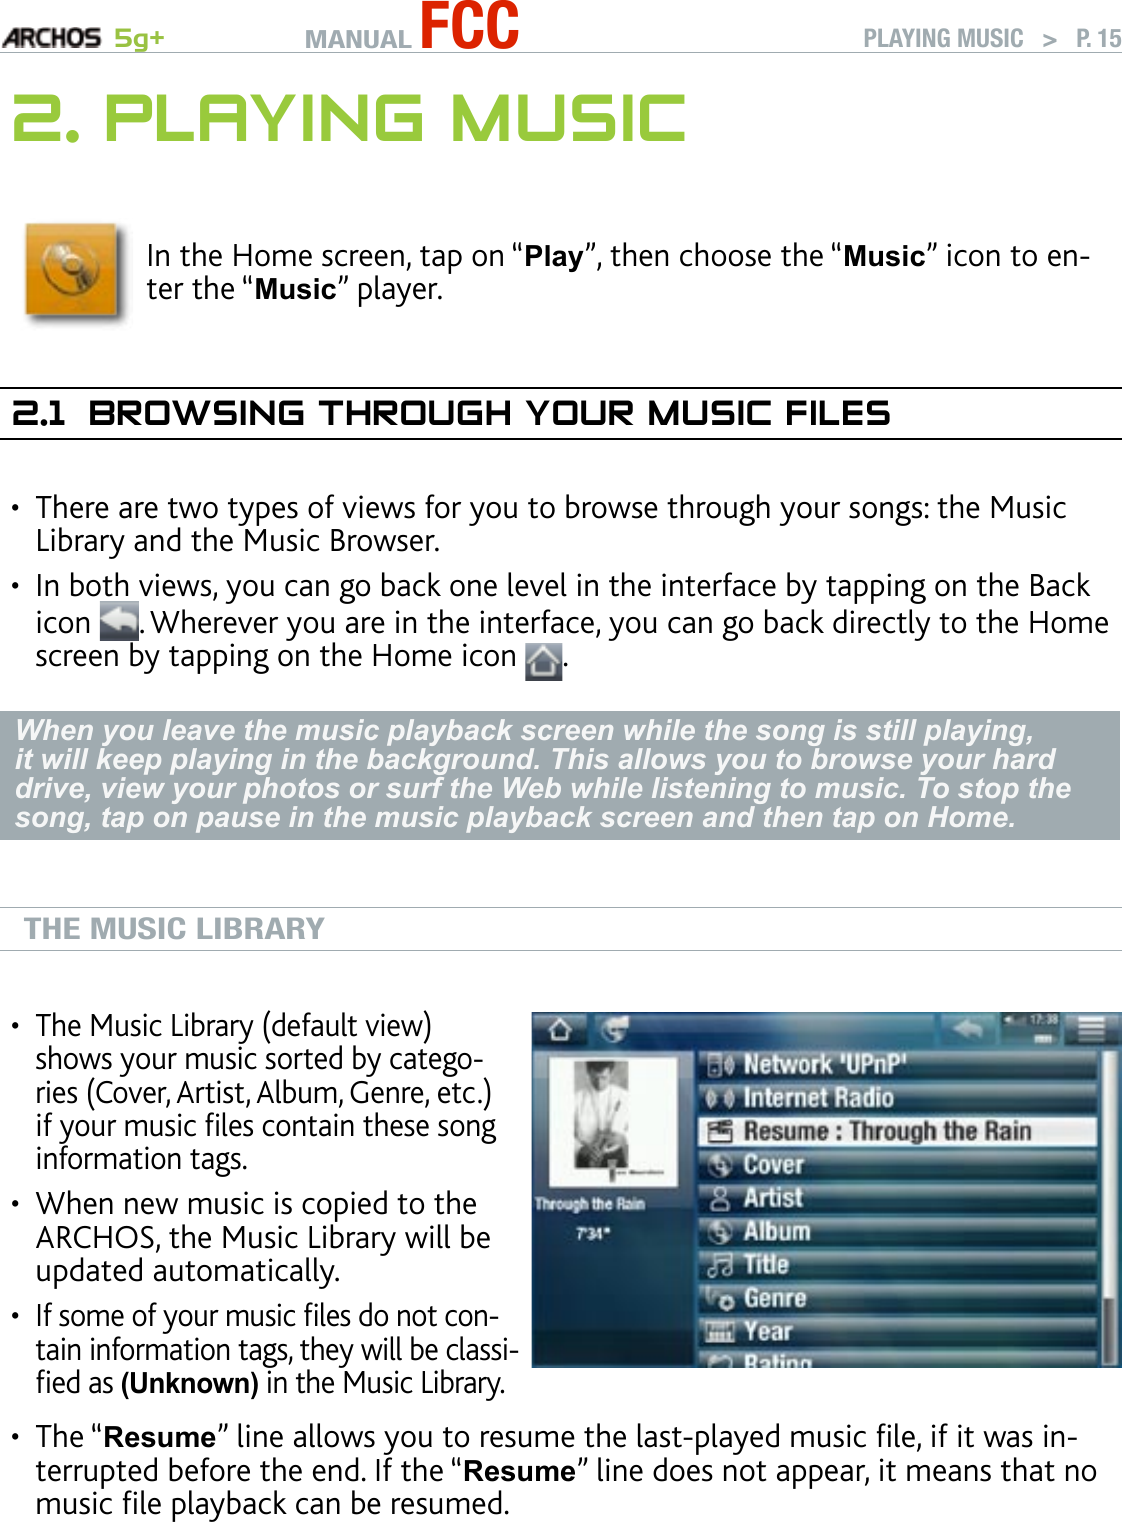 MANUAL FCC 5g+ PLAYING MUSIC   &gt;   P. 152. PlayIng MusICIn the Home screen, tap on “Play”, then choose the “Music” icon to en-ter the “Music” player.2.1  brOwsIng ThrOugh yOur MusIC fIlesThere are two types of views for you to browse through your songs: the Music Library and the Music Browser.In both views, you can go back one level in the interface by tapping on the Back icon  . Wherever you are in the interface, you can go back directly to the Home screen by tapping on the Home icon  .When you leave the music playback screen while the song is still playing, it will keep playing in the background. This allows you to browse your hard drive, view your photos or surf the Web while listening to music. To stop the song, tap on pause in the music playback screen and then tap on Home.THE MUSIC LIBRARYThe Music Library (default view) shows your music sorted by catego-ries (Cover, Artist, Album, Genre, etc.) if your music les contain these song information tags.When new music is copied to the ARCHOS, the Music Library will be updated automatically.If some of your music les do not con-tain information tags, they will be classi-ed as (Unknown) in the Music Library.•••The “Resume” line allows you to resume the last-played music le, if it was in-terrupted before the end. If the “Resume” line does not appear, it means that no music le playback can be resumed.•••